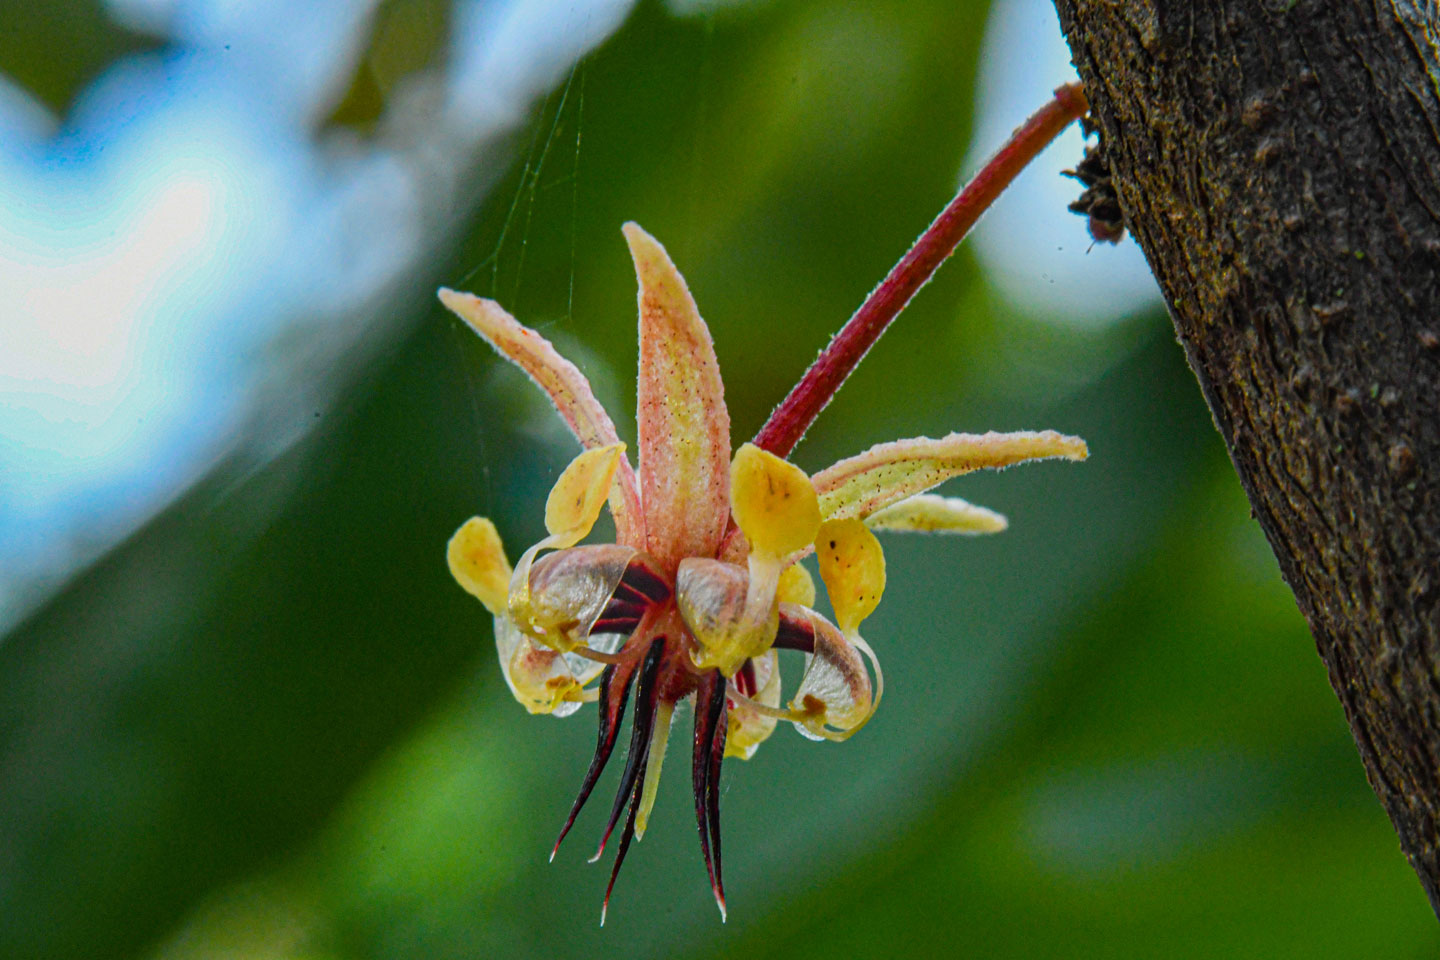 Cacao flower